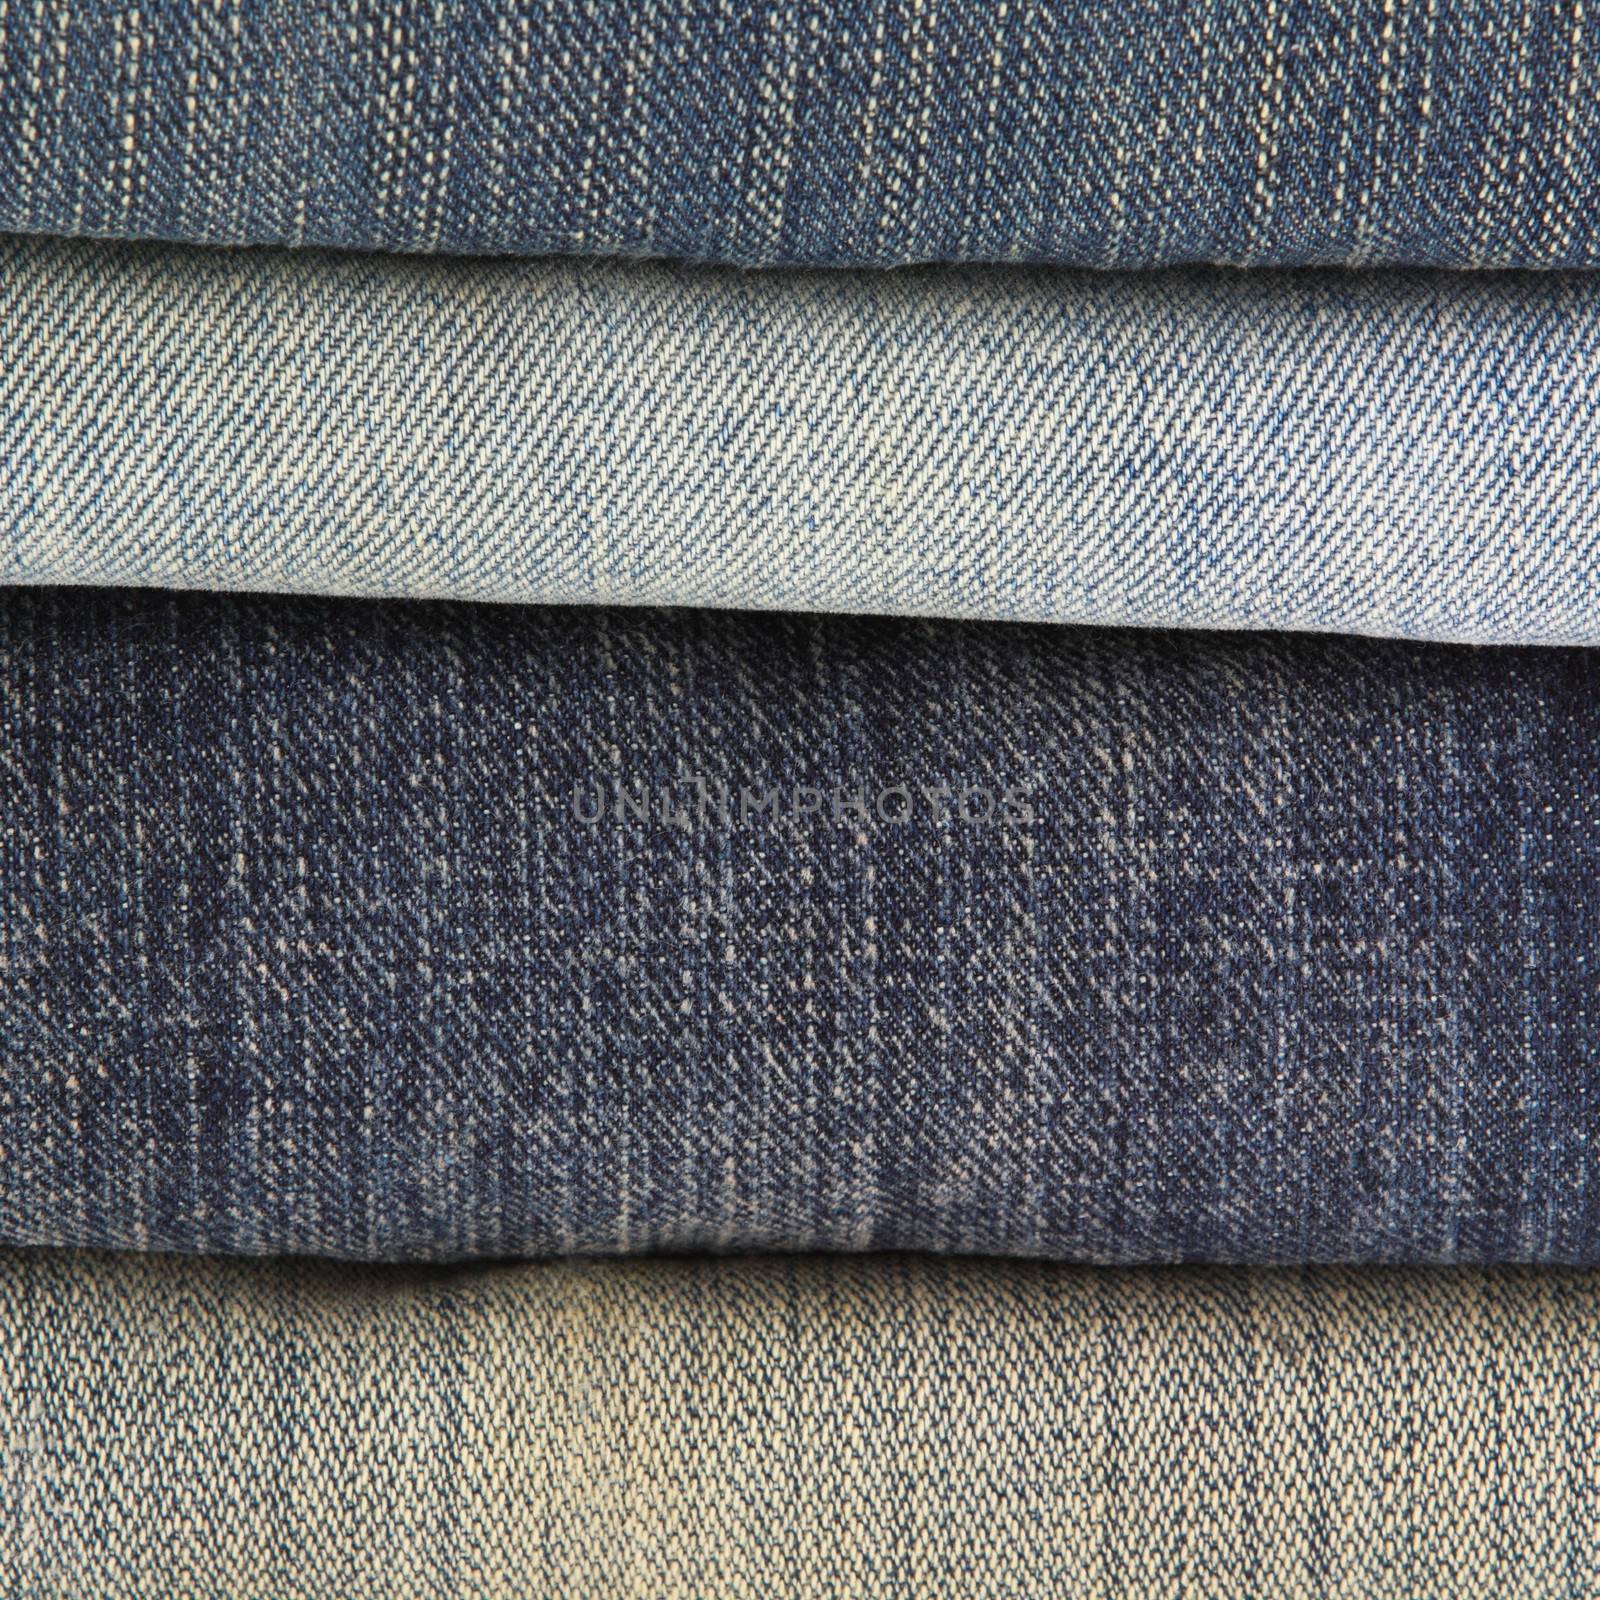 Blue jeans layer background